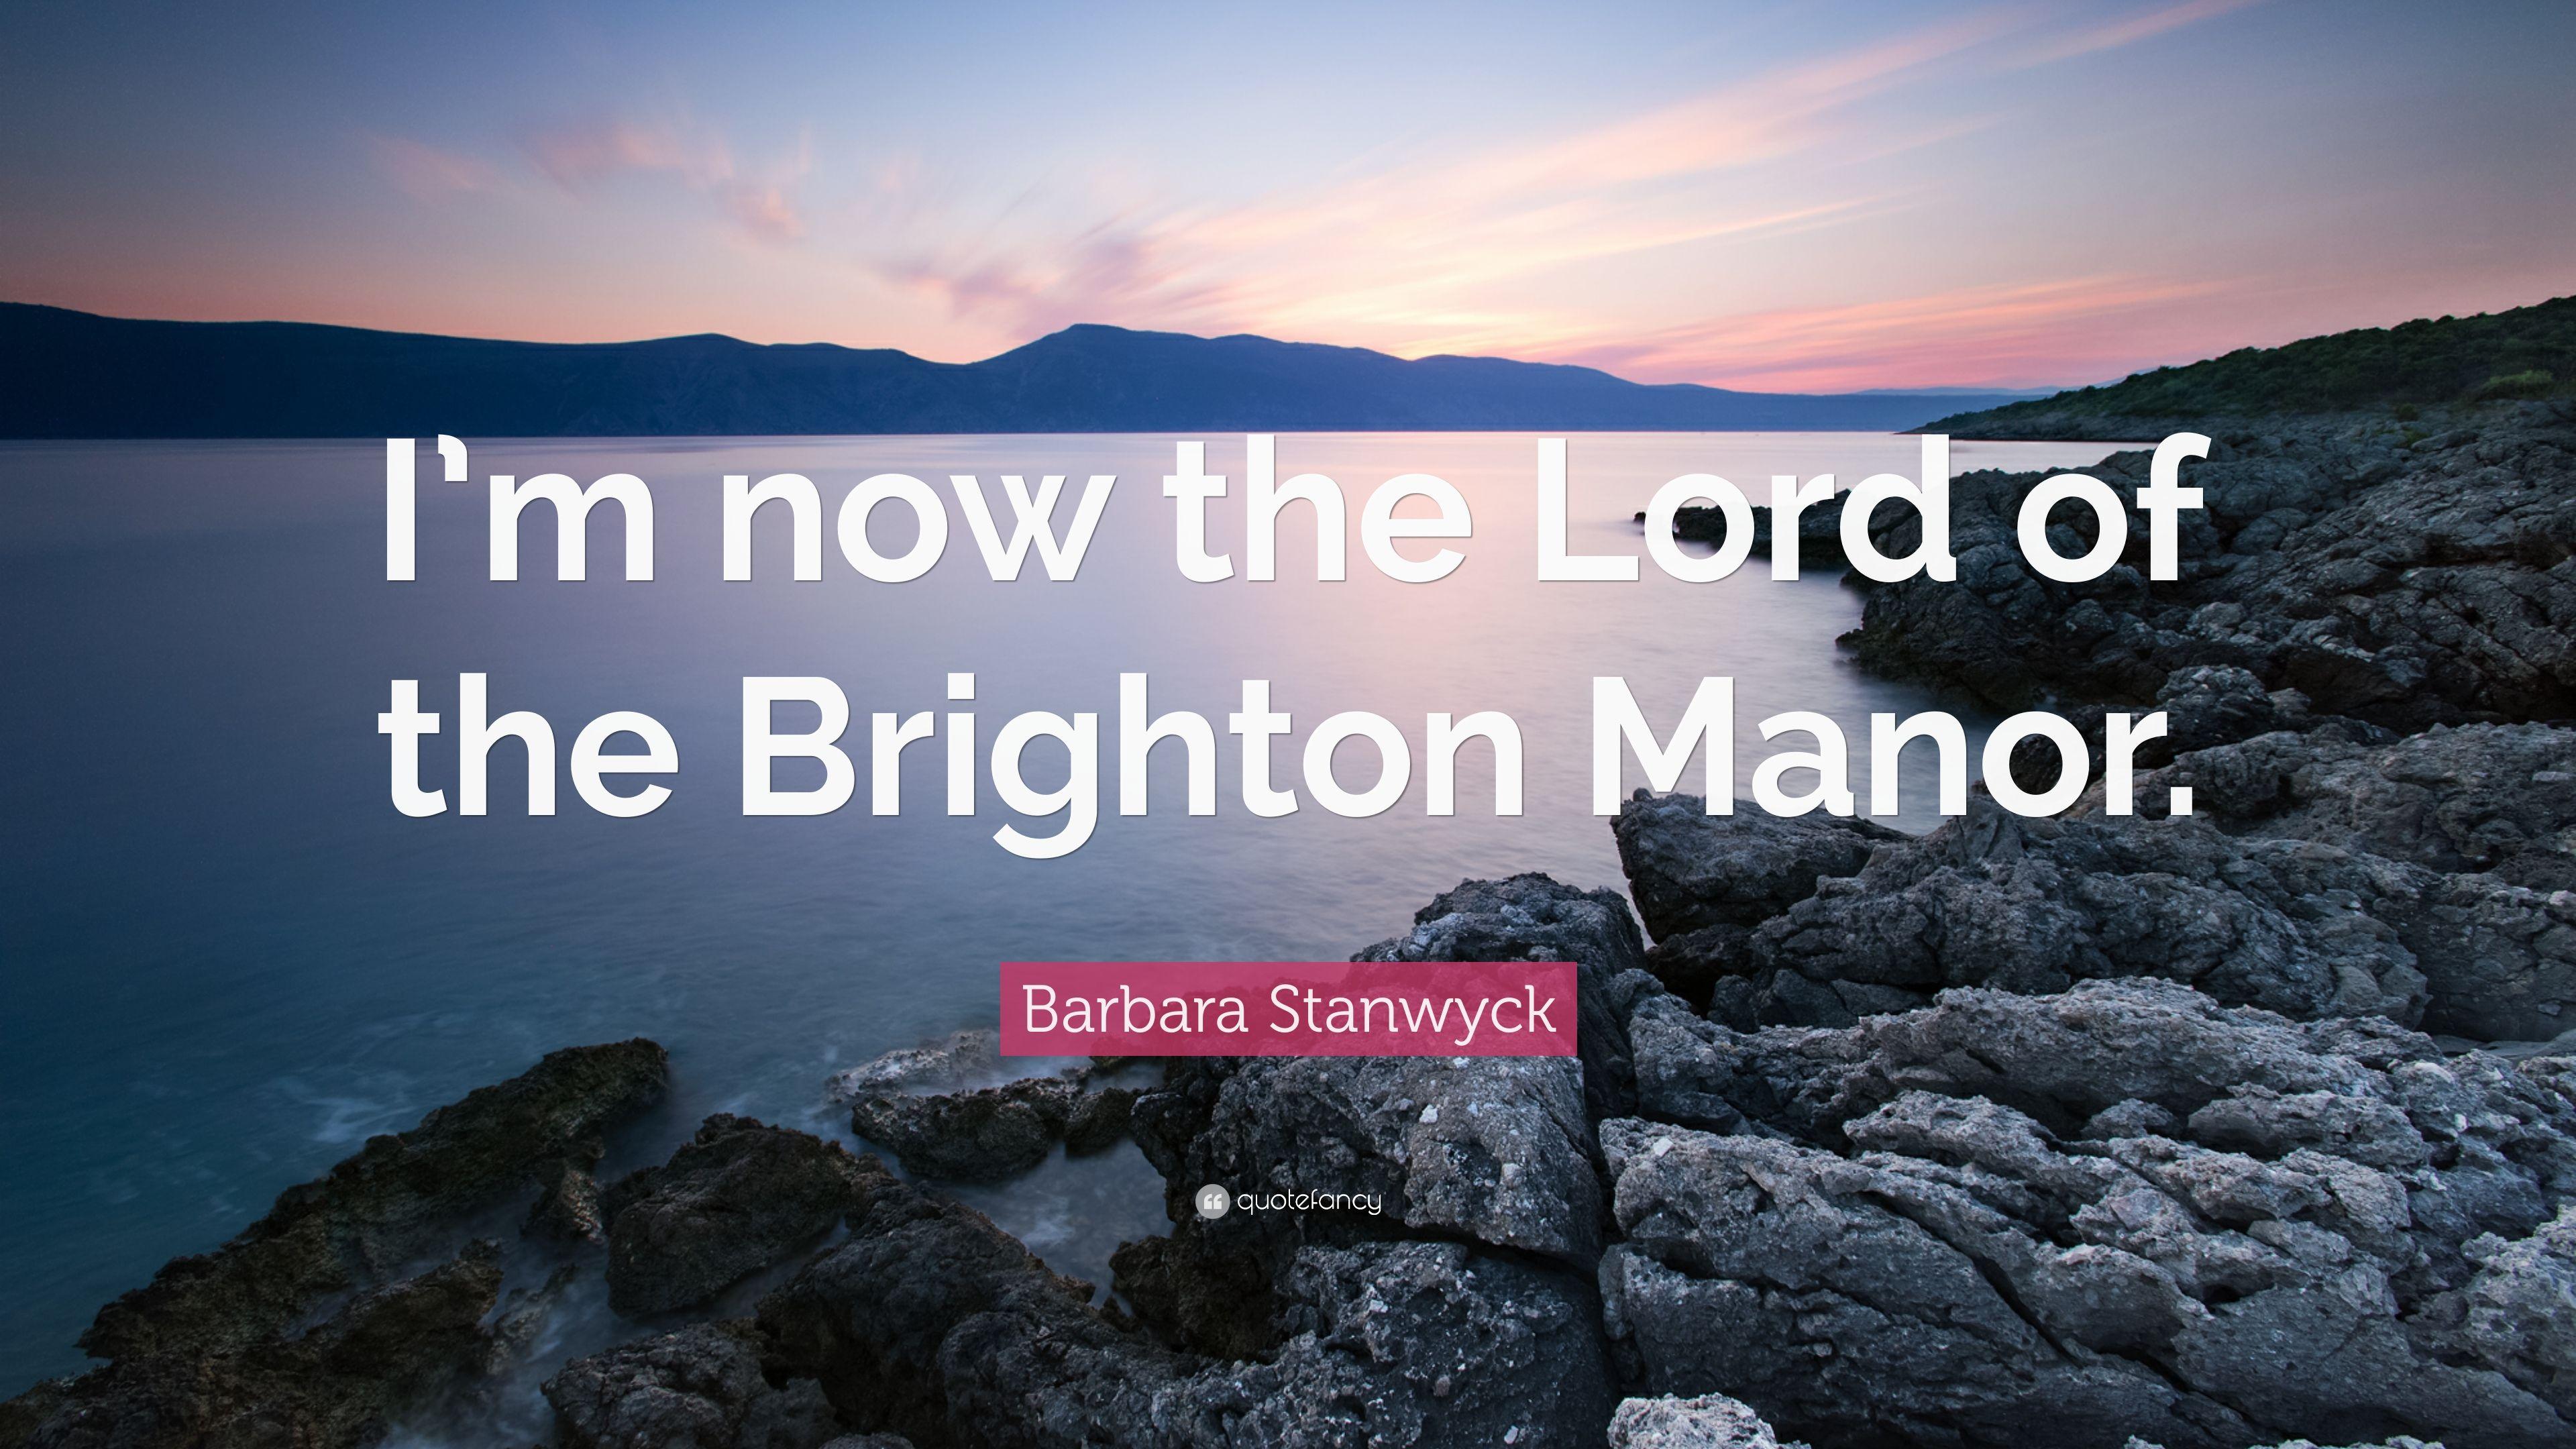 Barbara Stanwyck Quote: “I'm now the Lord of the Brighton Manor.” 7